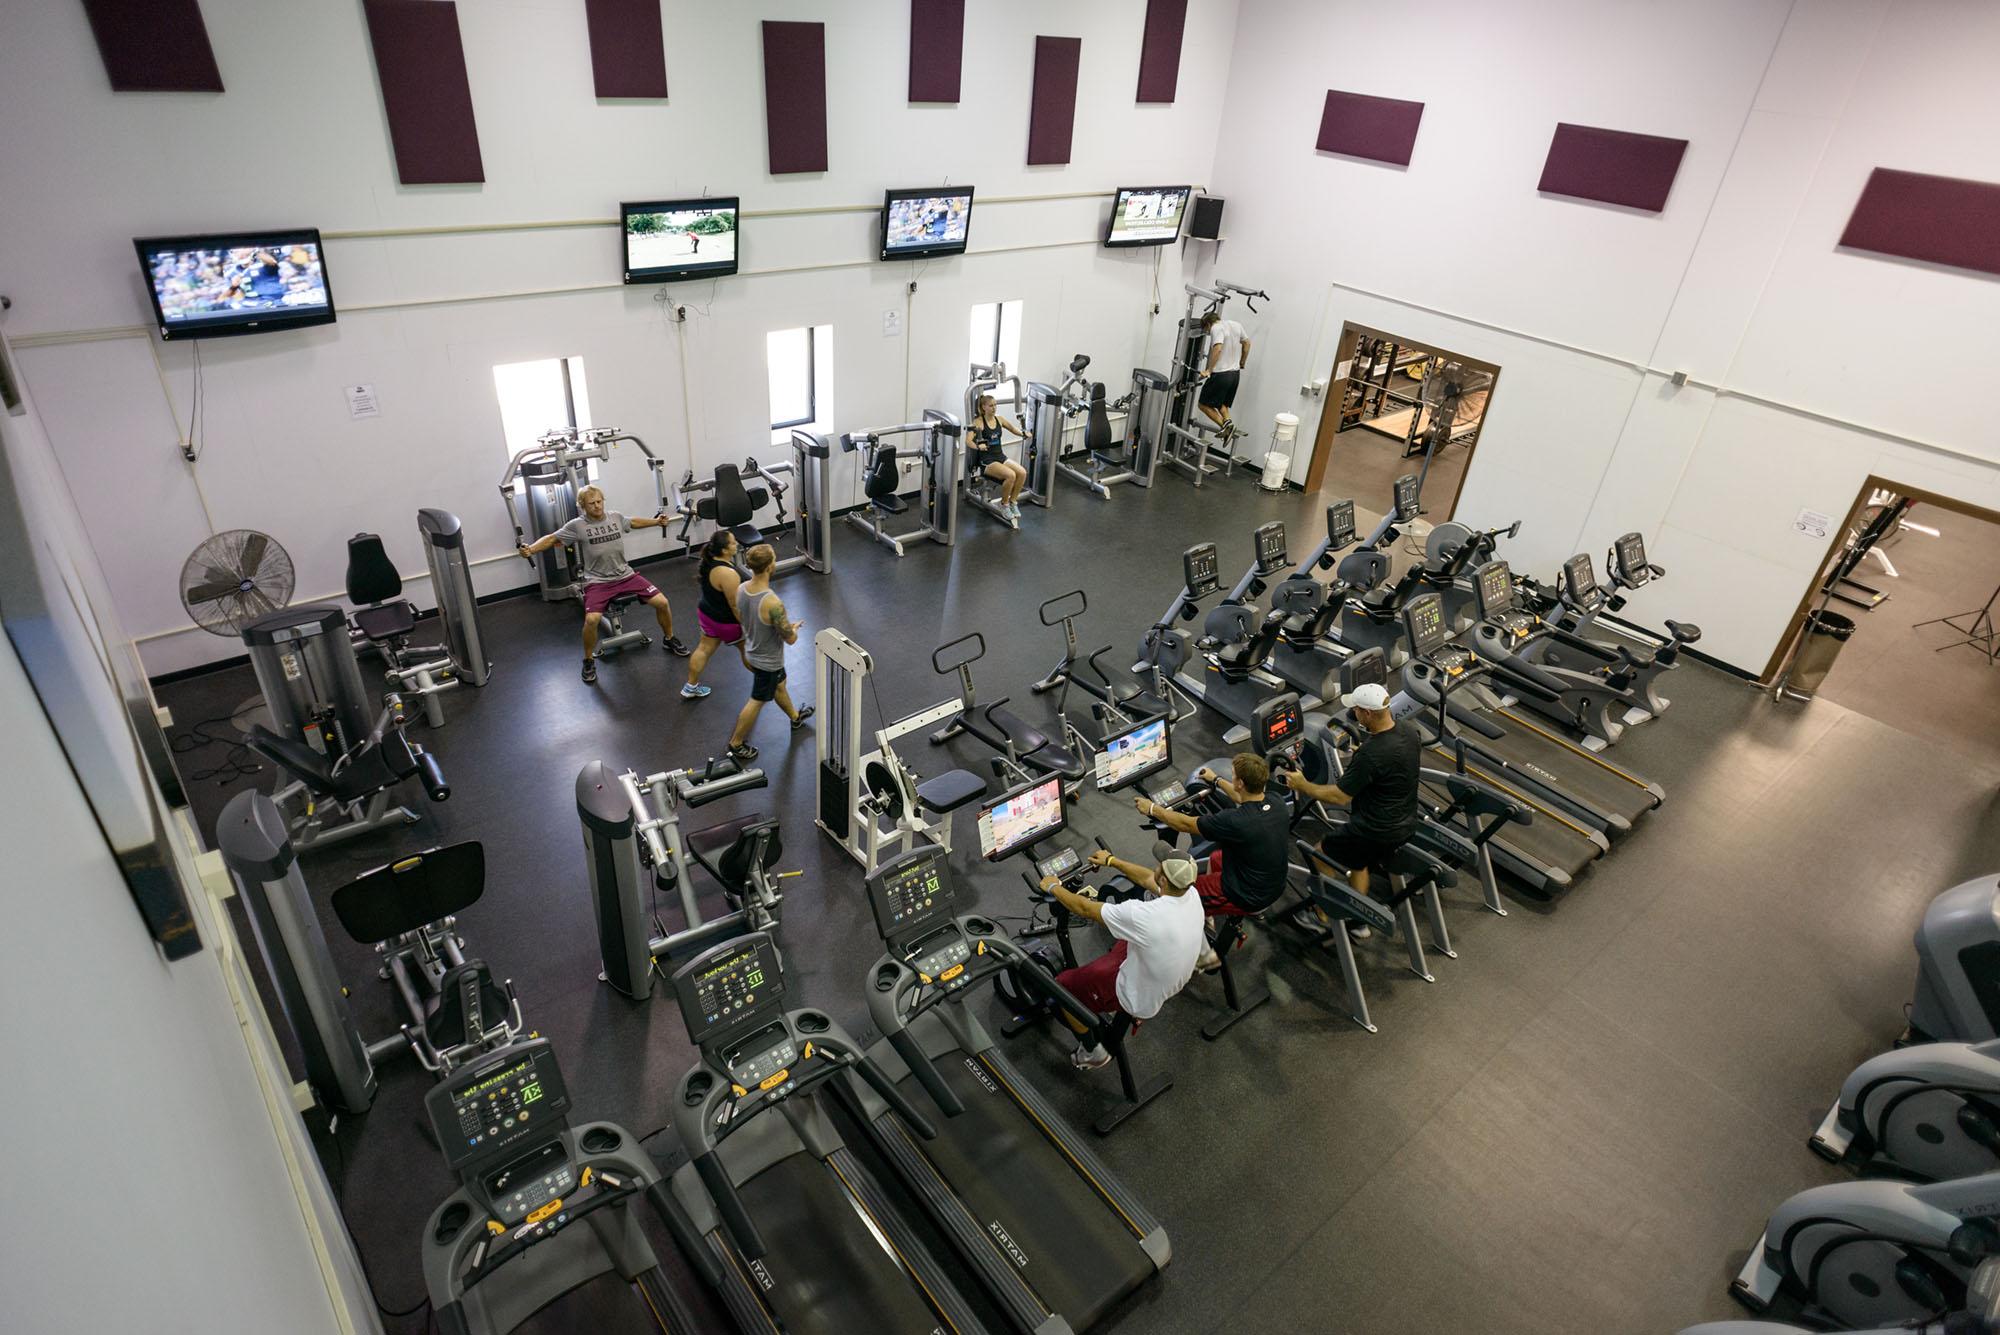 Photo of the exercise equipment at the NPAC